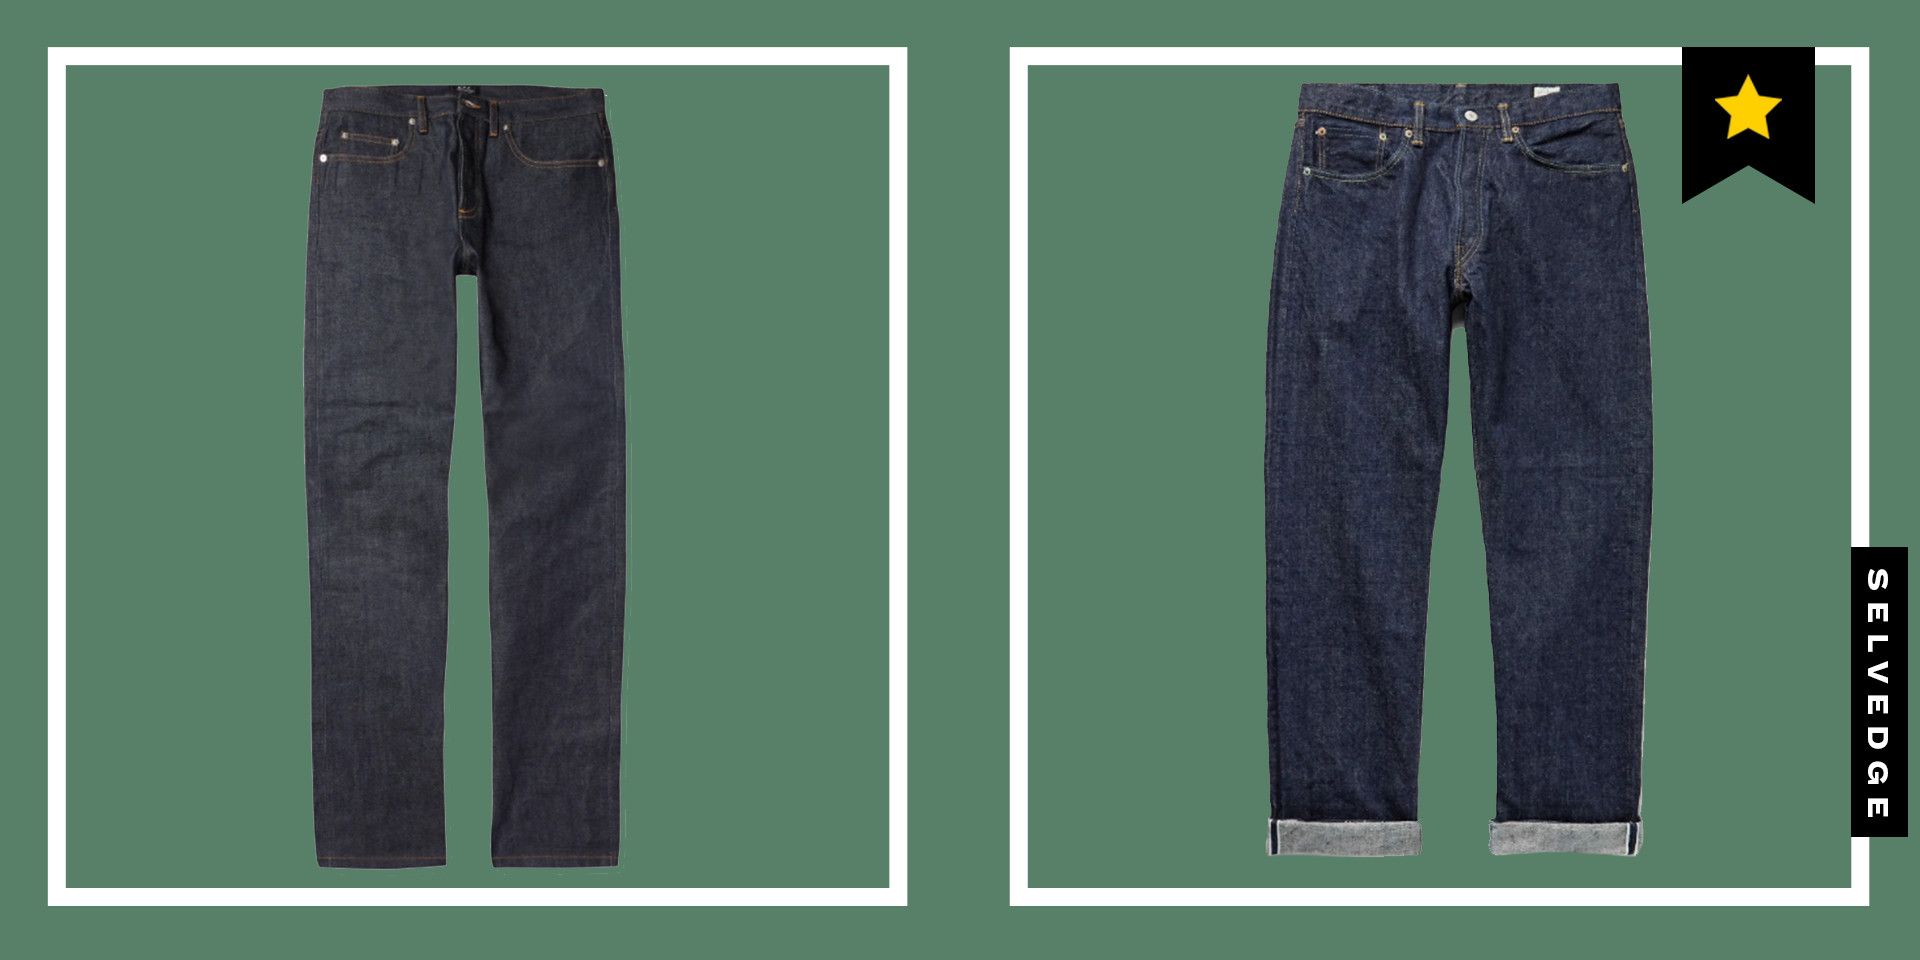 Introducing the New Moustache's Selvedge Denim Delights